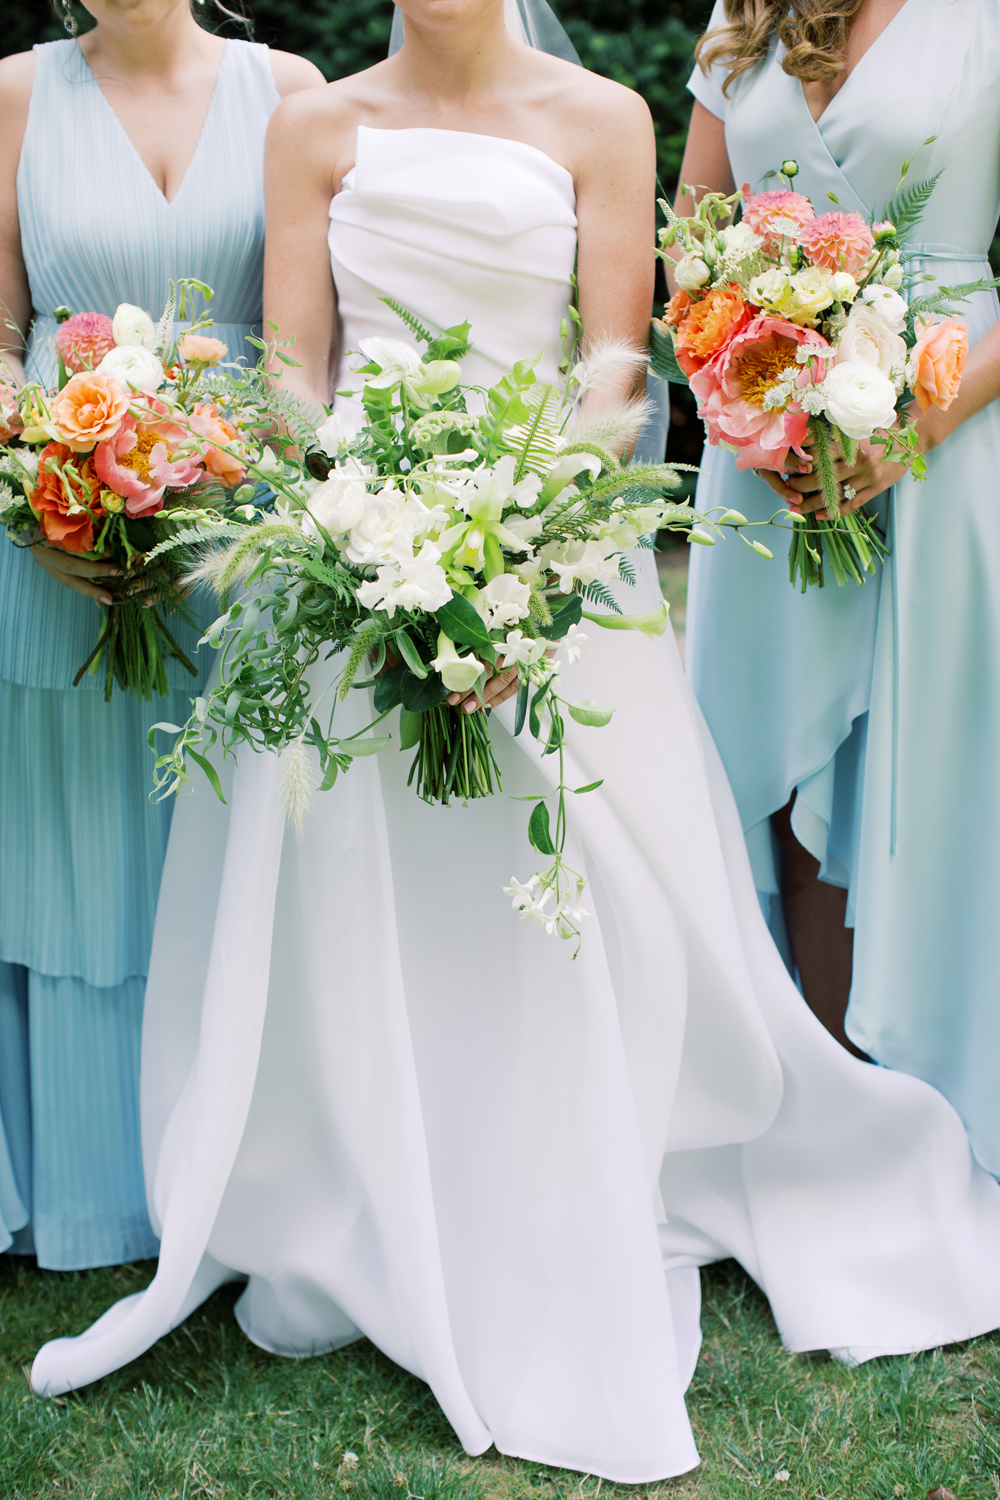 wedding bouquets with peonies and roses and blue dresses with organic natural design by Arenas | Mary Dougherty